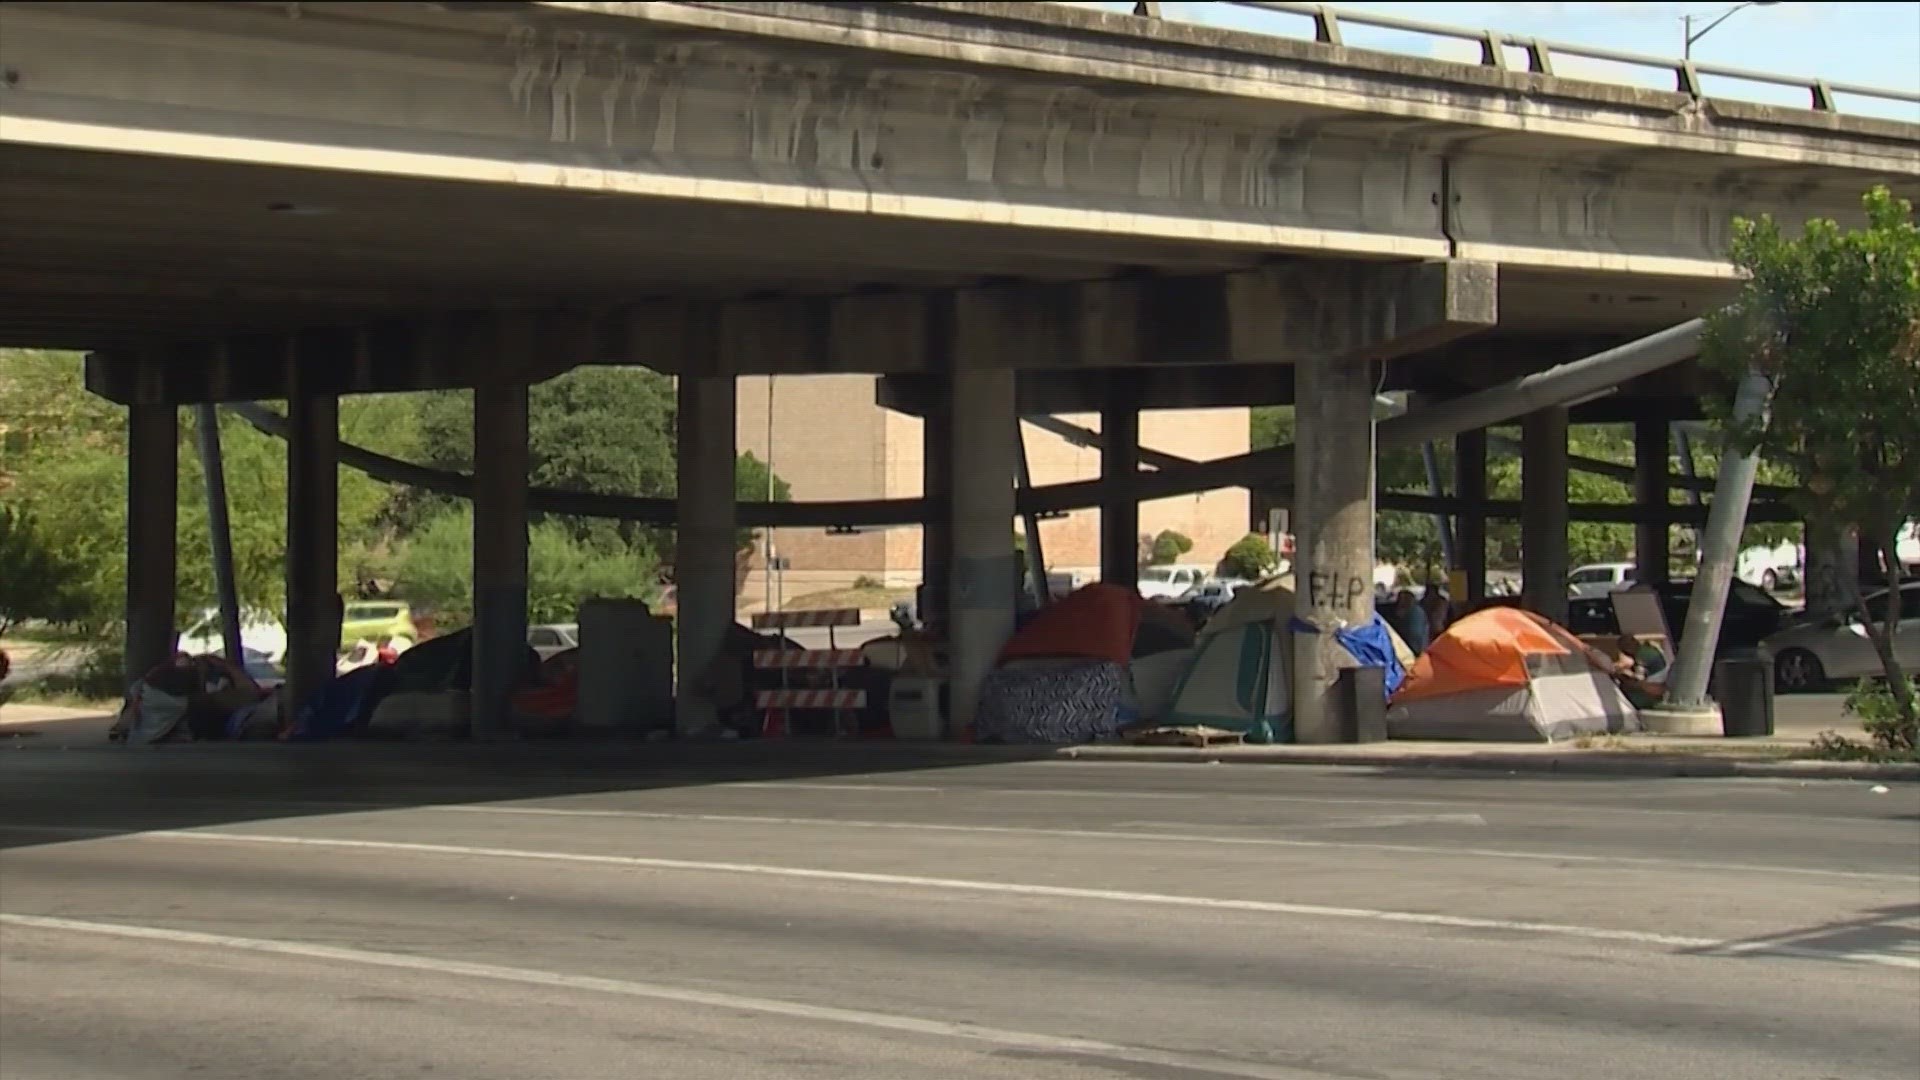 A billionaire, new to Austin, wants to help address homelessness in the city. KVUE's Melia Masumoto has more on how his large donation will support local businesses.